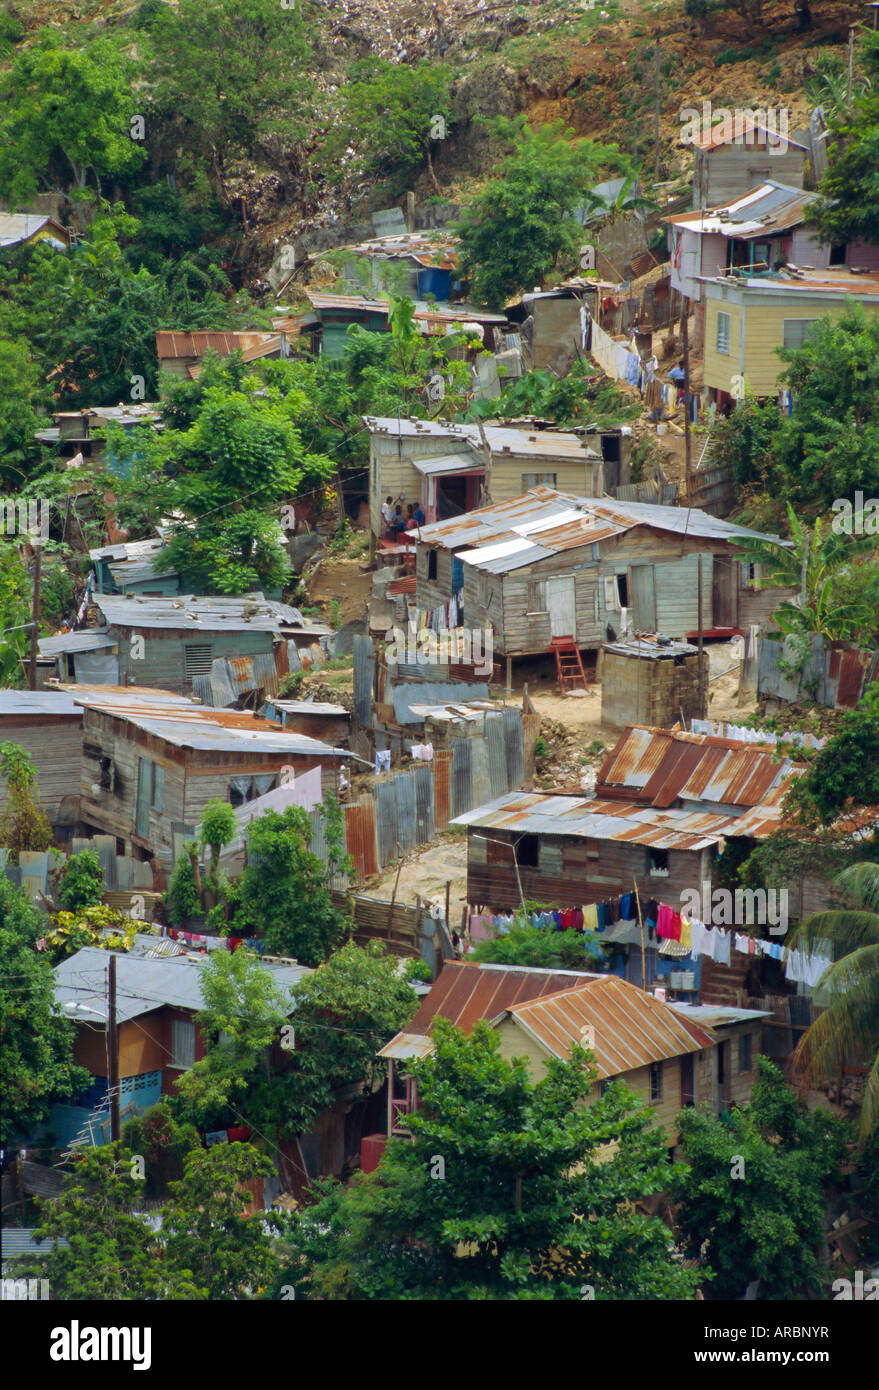 Shanty town, Montego Bay, Jamaica, Caribbean, West Indies Stock Photo